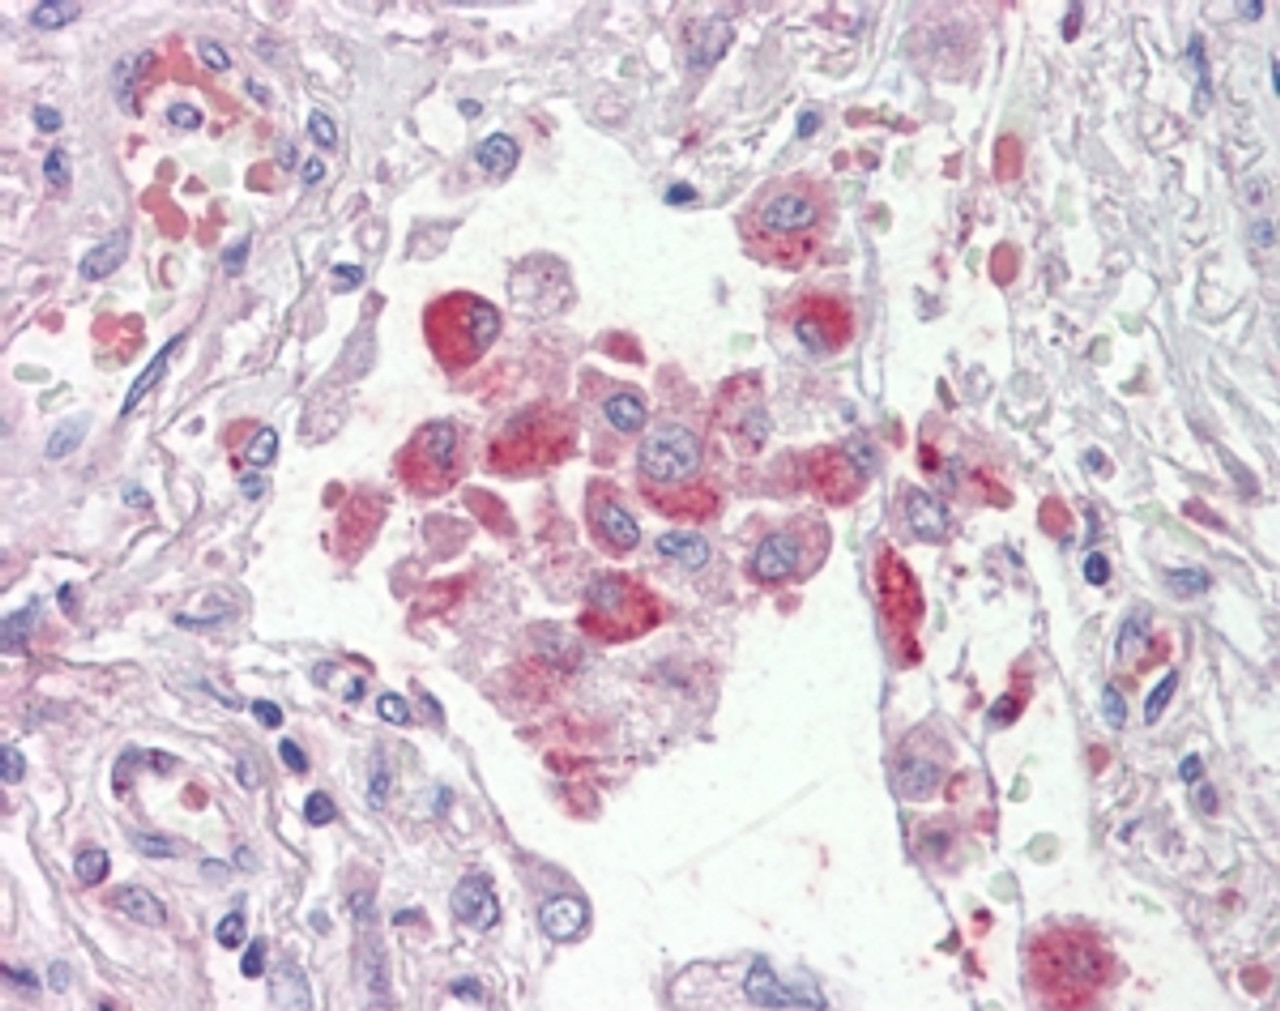 46-112 (2.5ug/ml) staining of paraffin embedded Human Lung. Steamed antigen retrieval with citrate buffer pH 6, AP-staining.